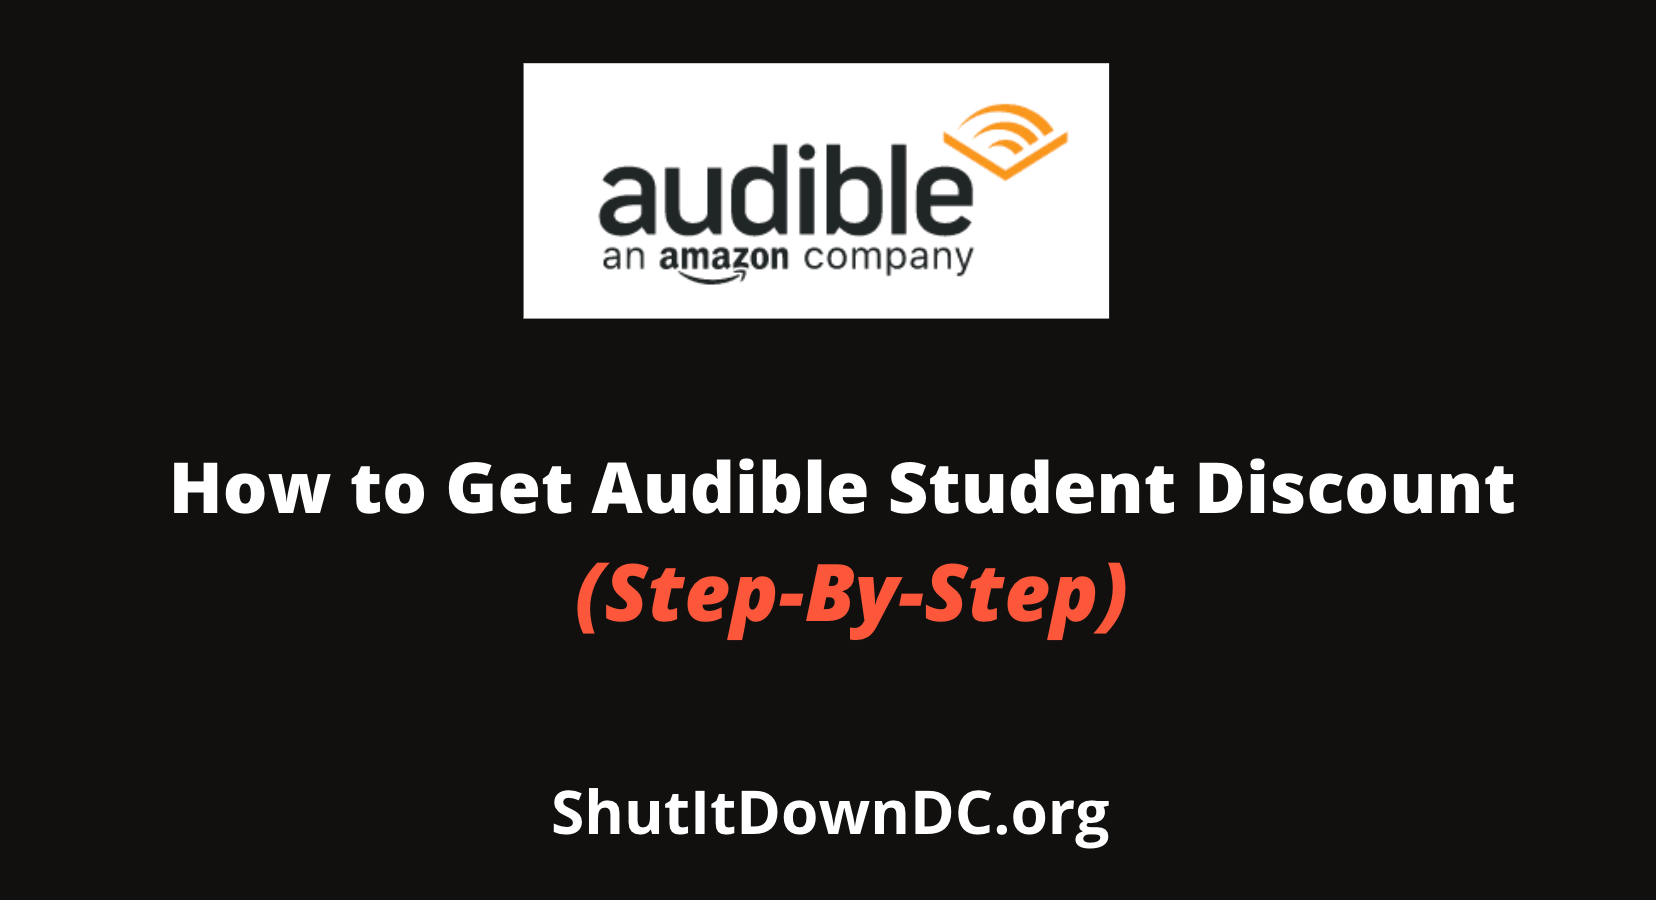 How to Get Audible Student Discount